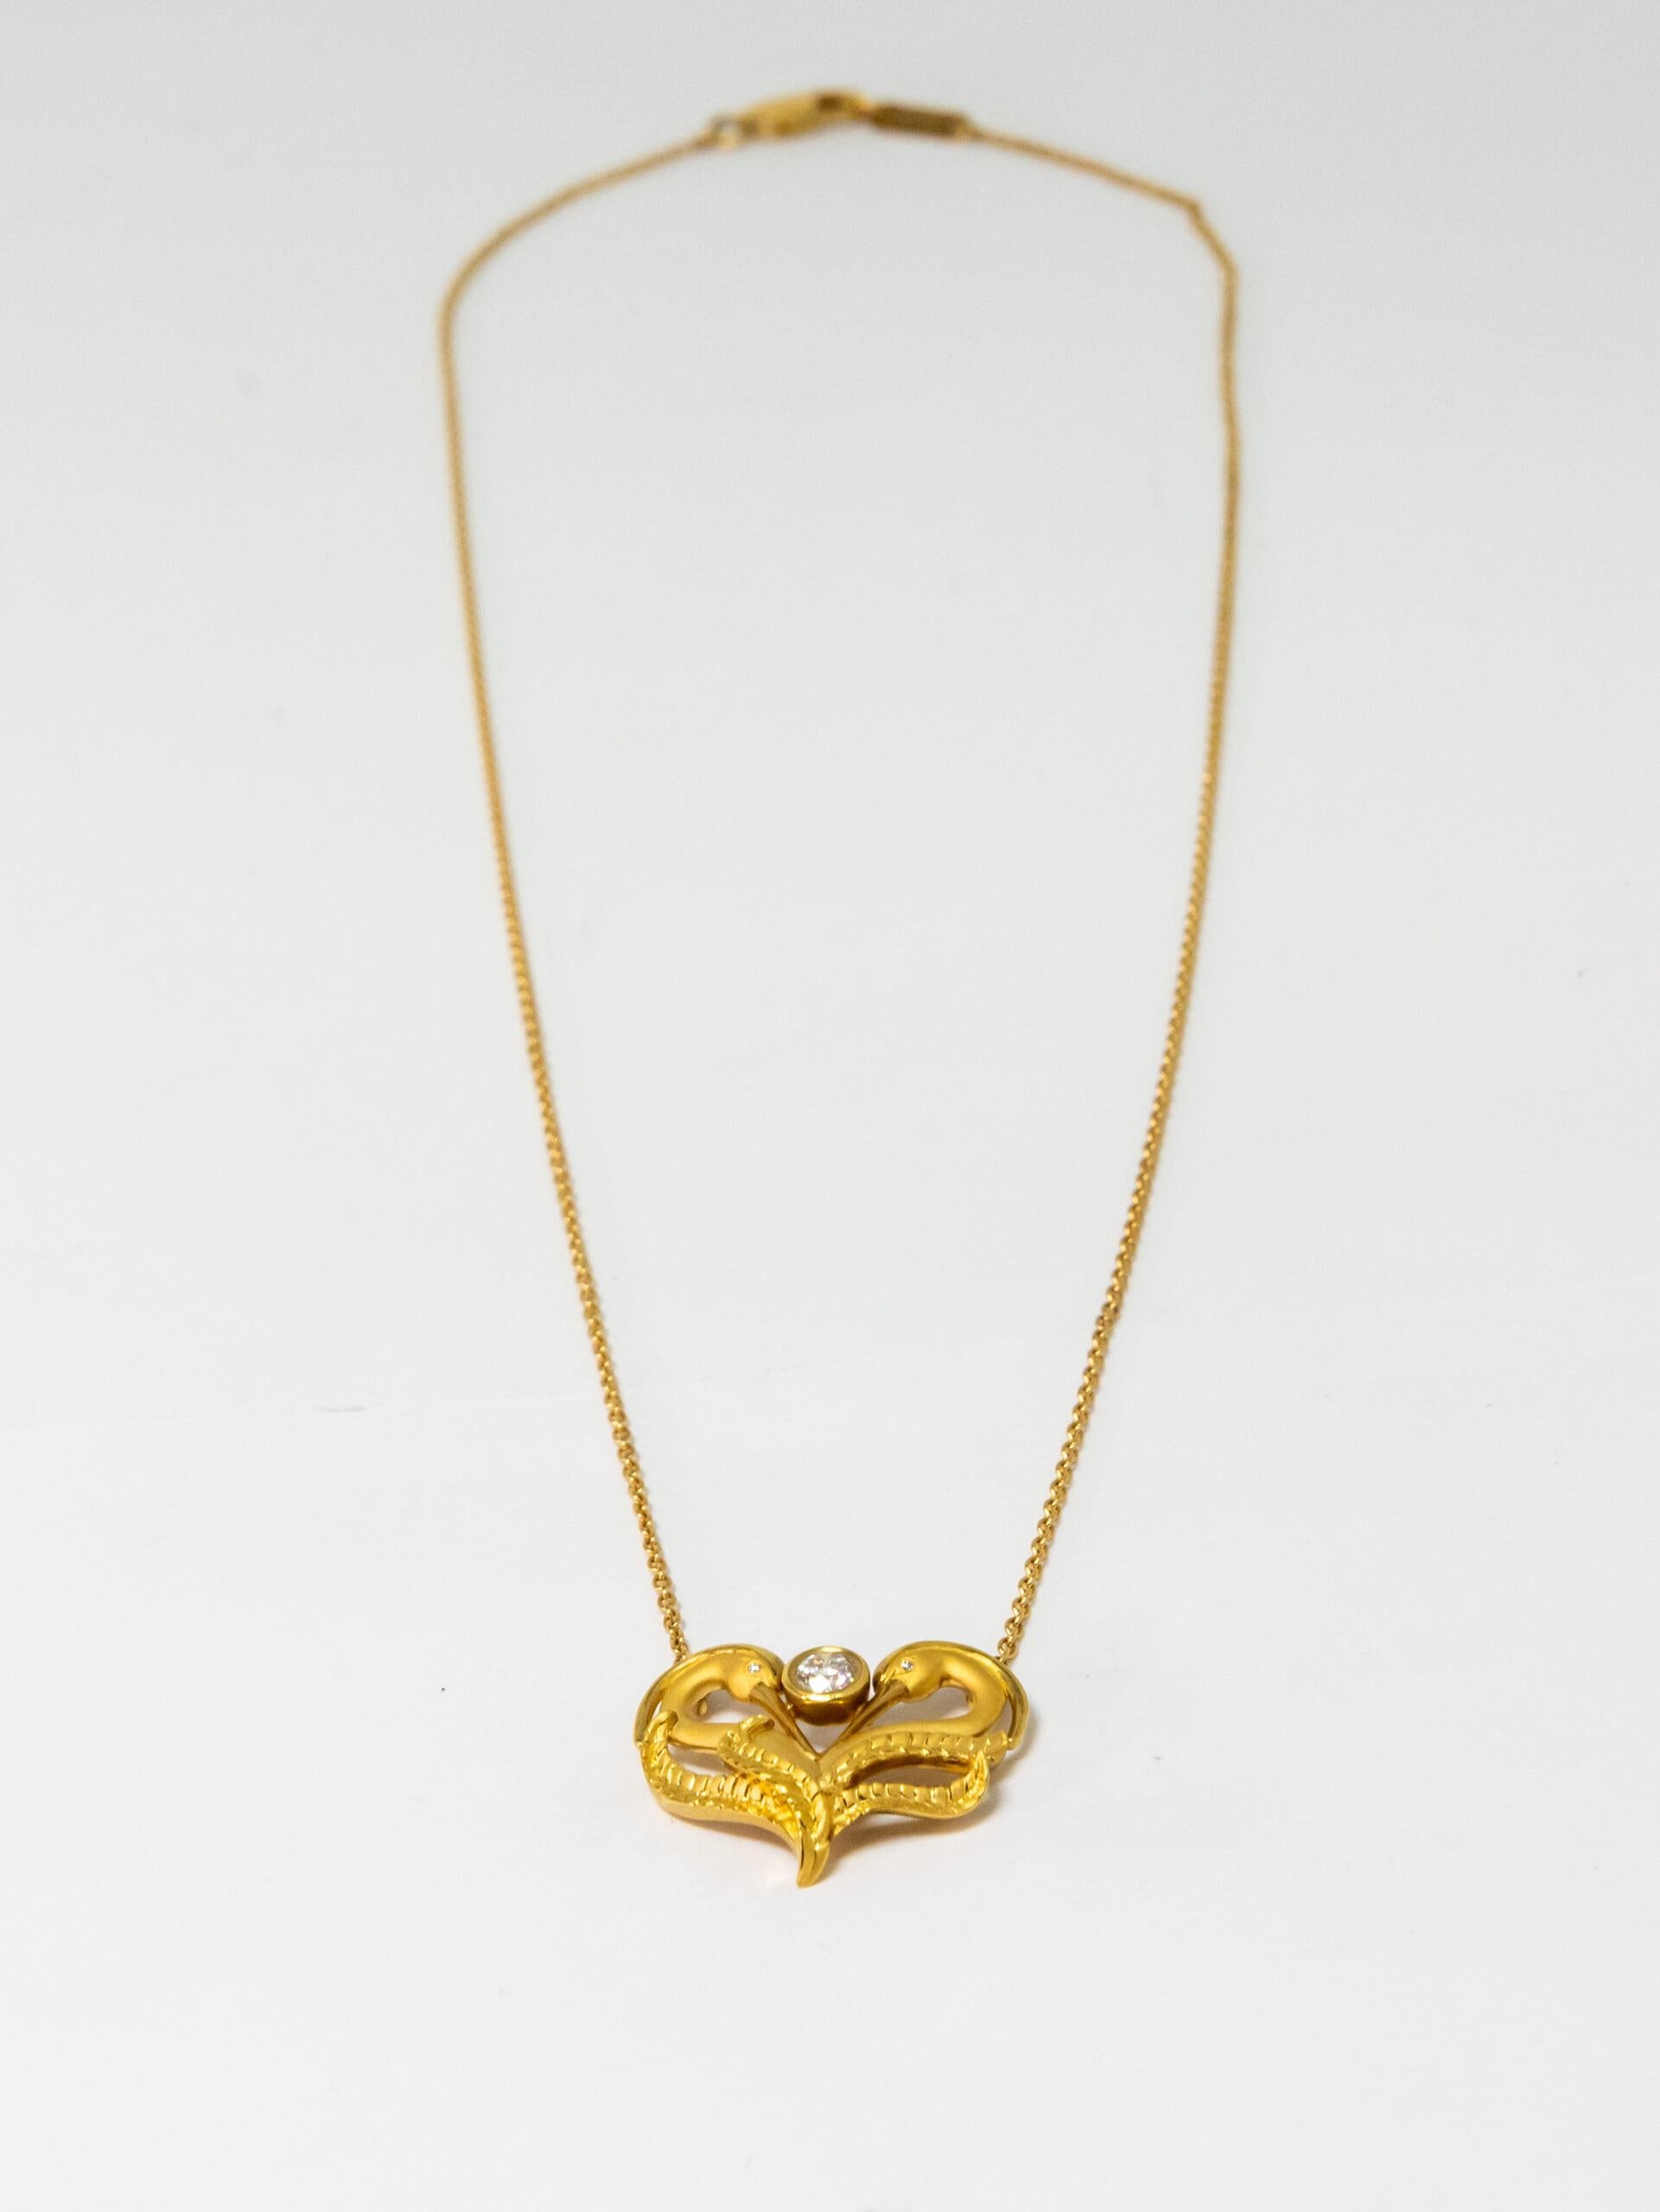 18K Yellow Gold pendant. 18K Yellow Gold Rolo chain with lobster claw lock. Two figures of 18K Yellow Gold cranes placed in the heart shape. The main Diamond (~0.20ct) in the middle. The eyes of the cranes made with diamonds (~0.01ct)

Length: 23 cm